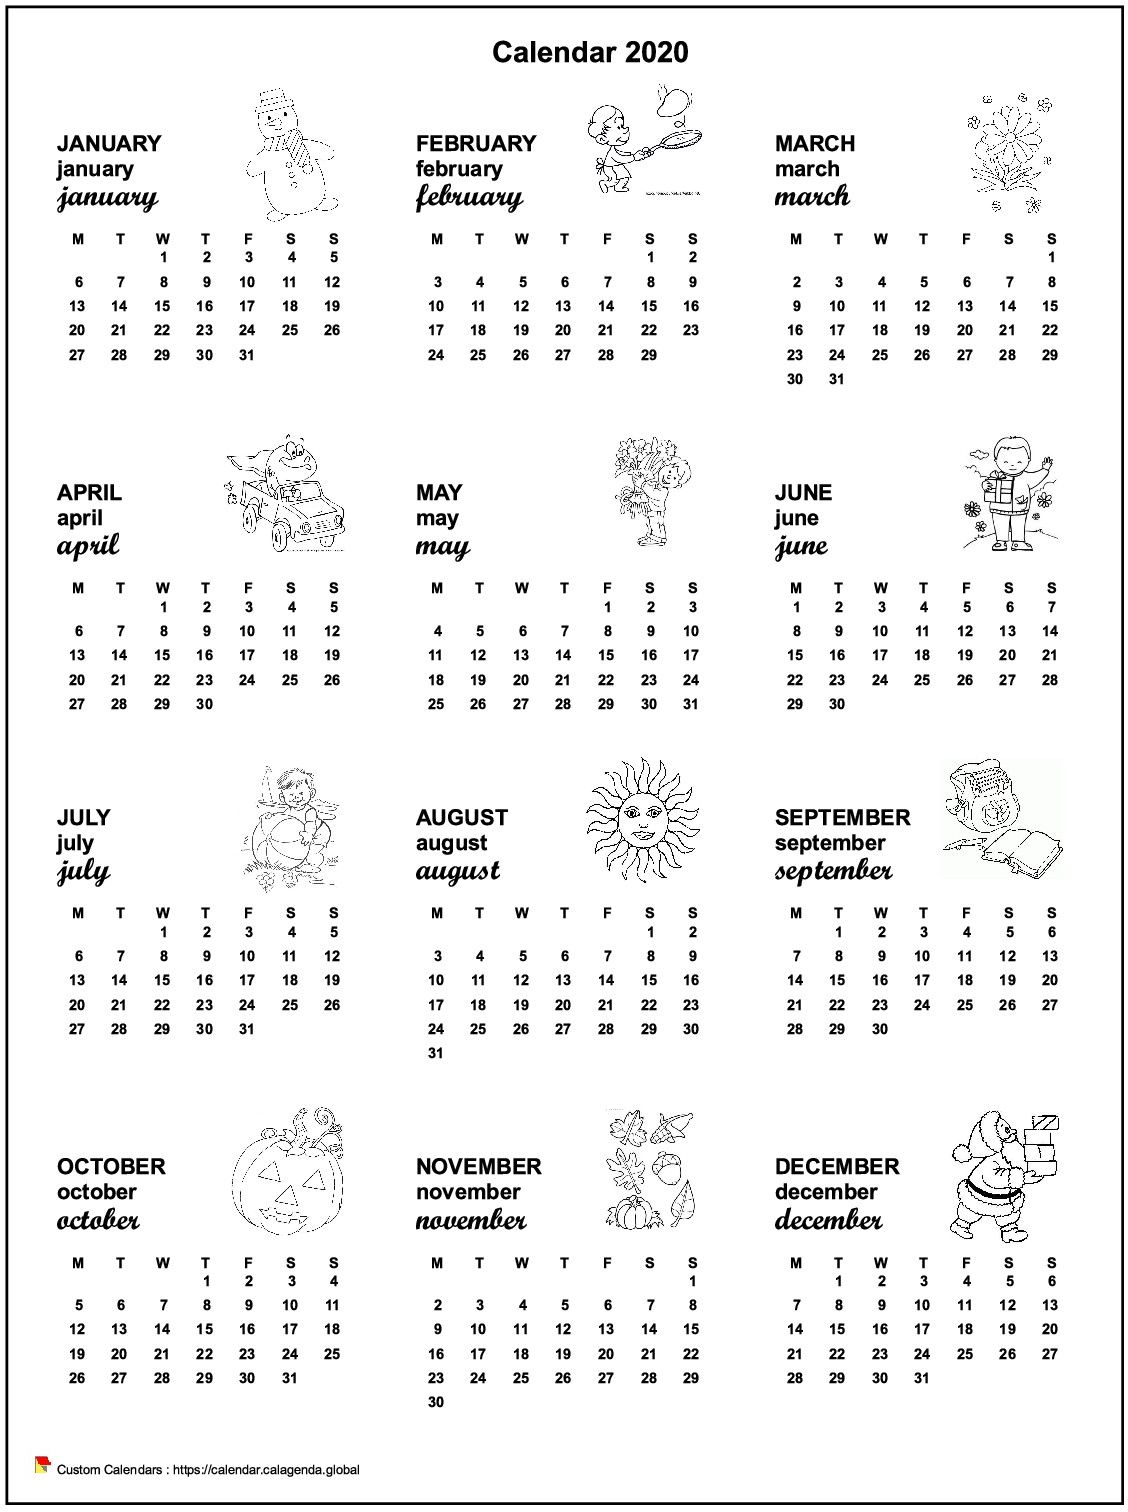 Calendar 2060 annual maternal and primary school